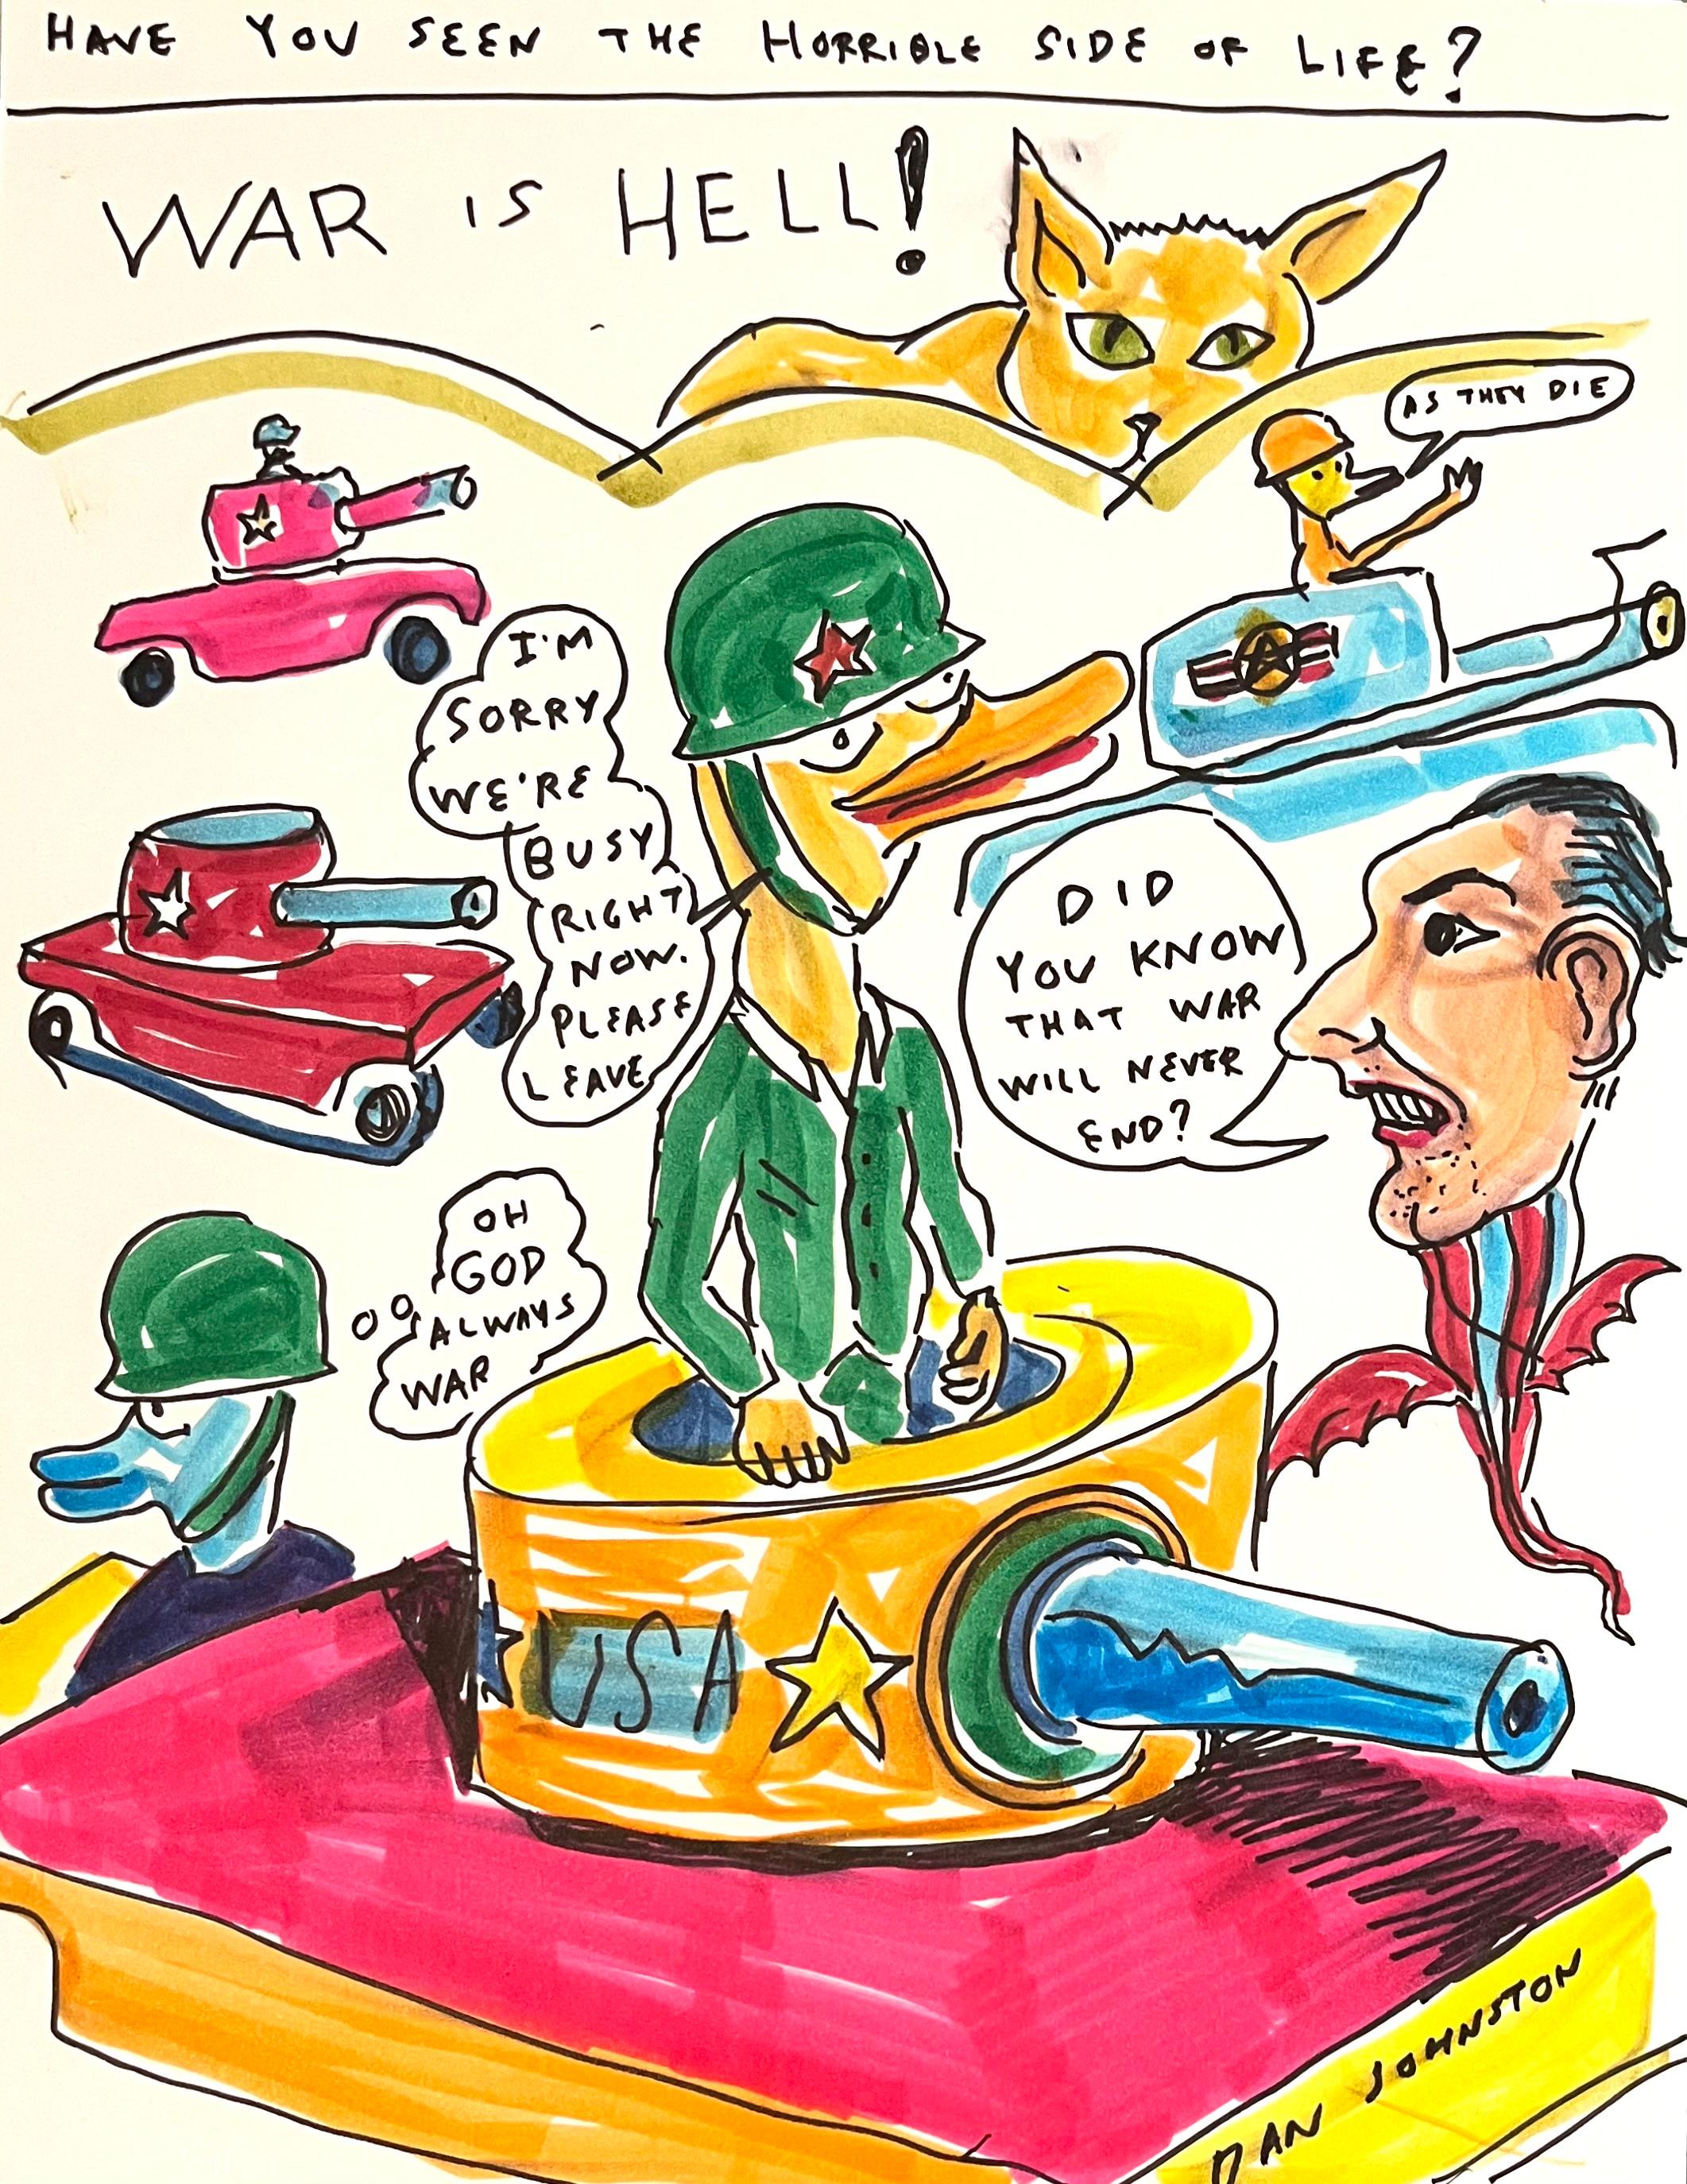 Figurative Art Daniel Johnston - Have You Seen the Horrible Side of Life - Drawing Figure Ink, Duck Wars Series